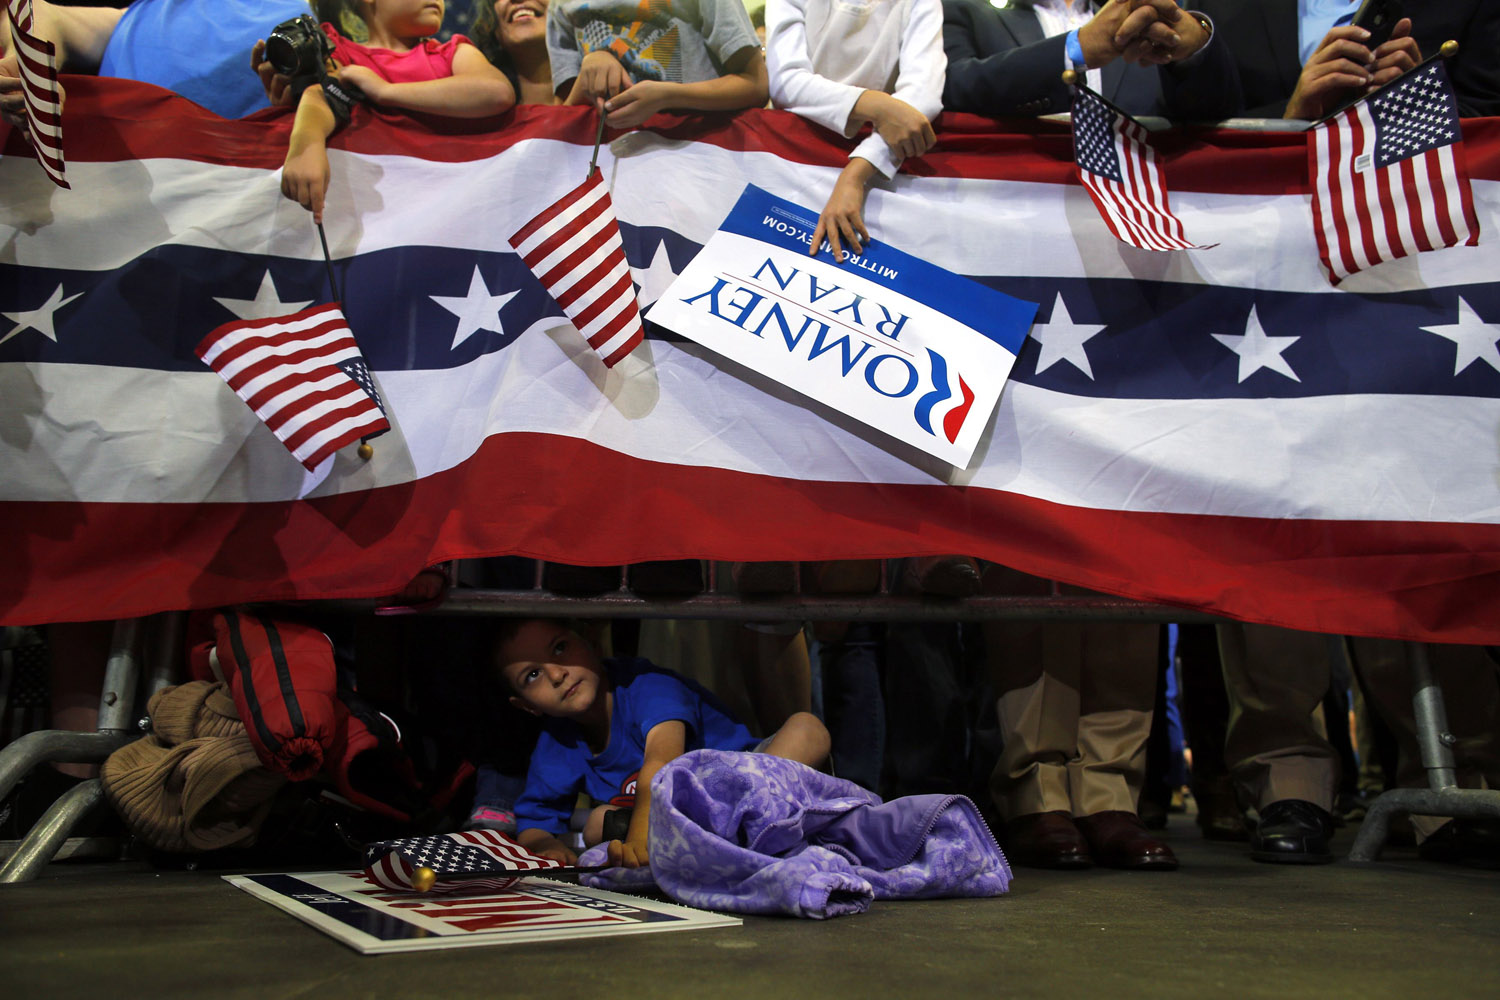 Image: Oct. 27, 2012. A young boy looks out from under the barrier at the edge of the stage as Republican presidential nominee Mitt Romney speaks at a campaign rally in Pensacola, Fla.